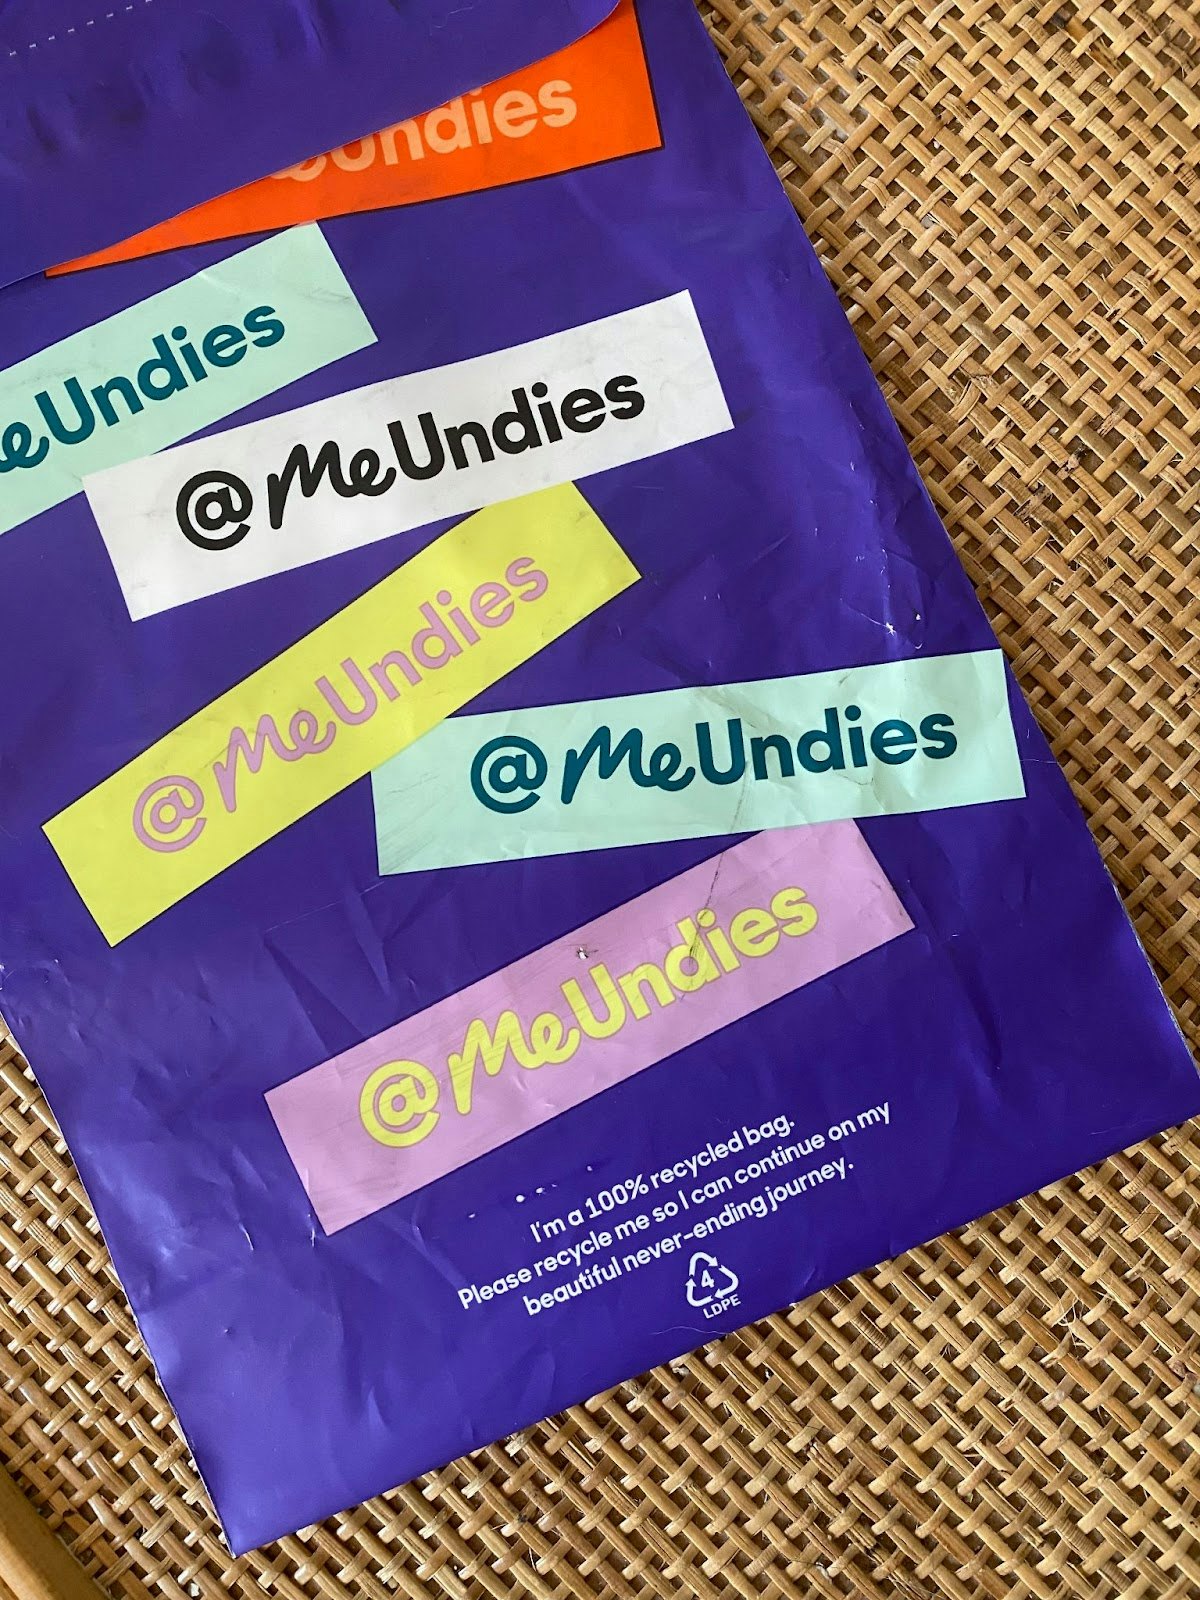 An Honest Review of MeUndies Boxers, According To A Non-Binary